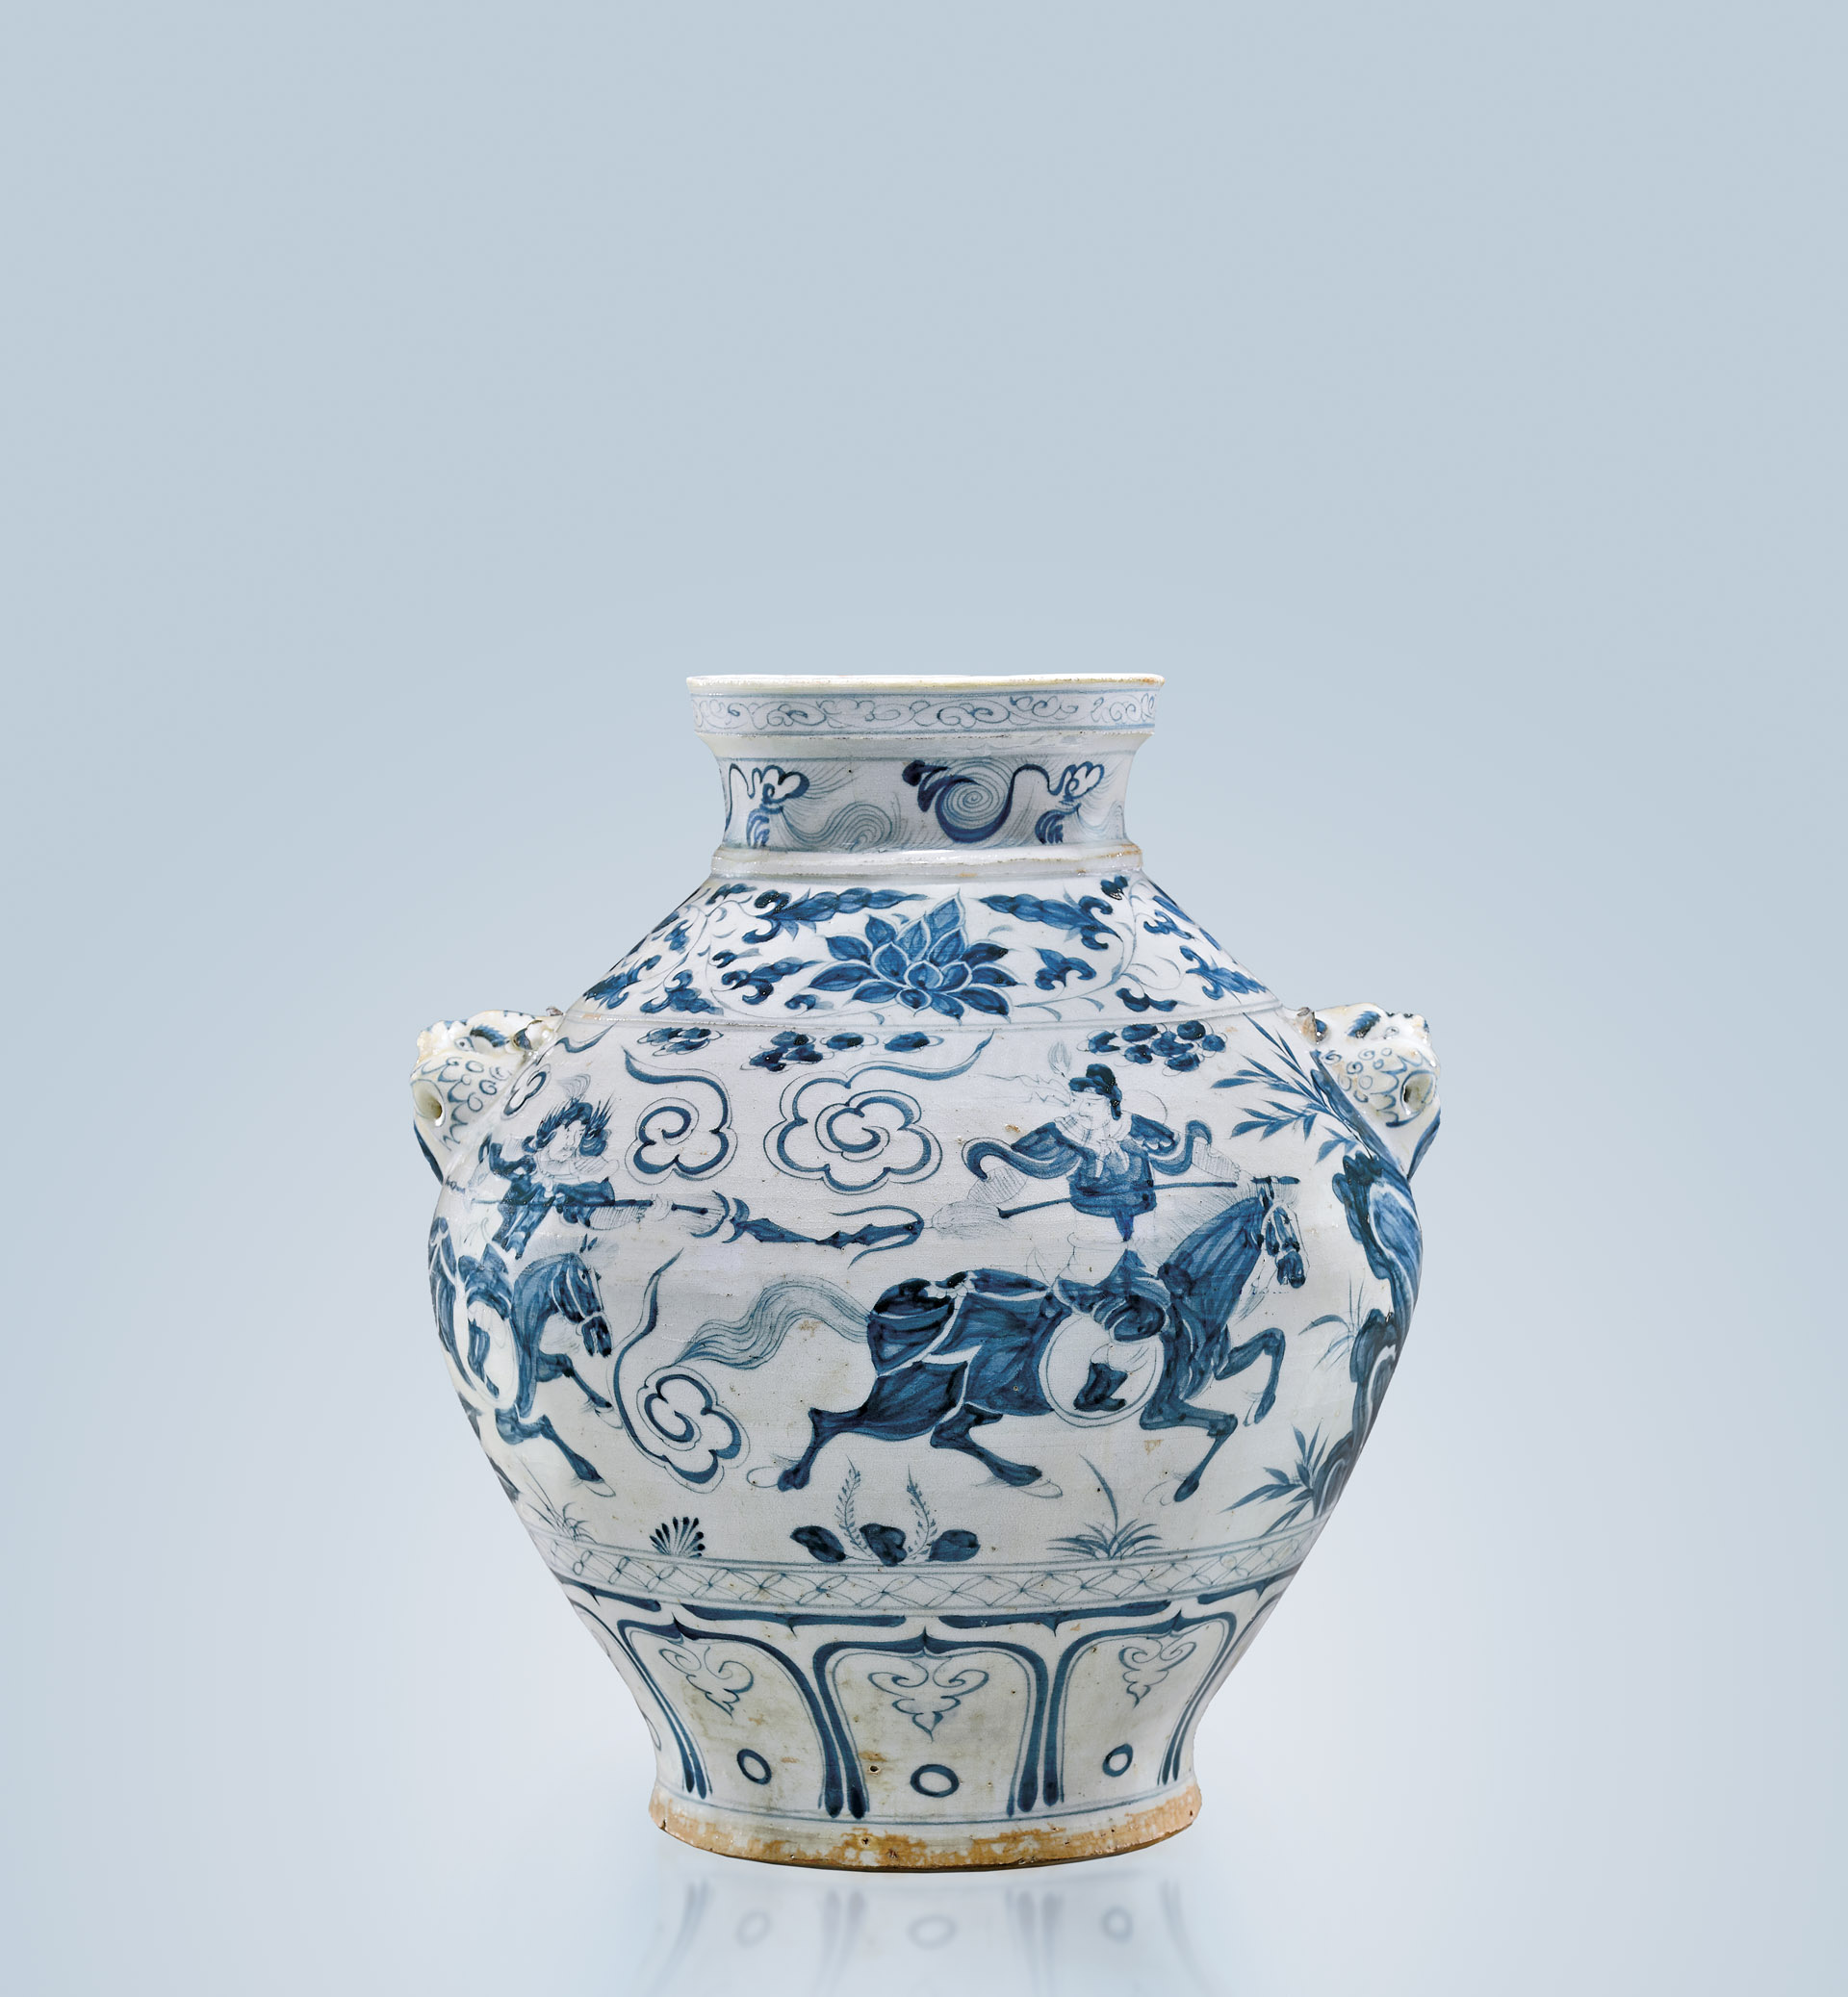 14th-century Yuan Dynasty blue and white ovoid porcelain jar